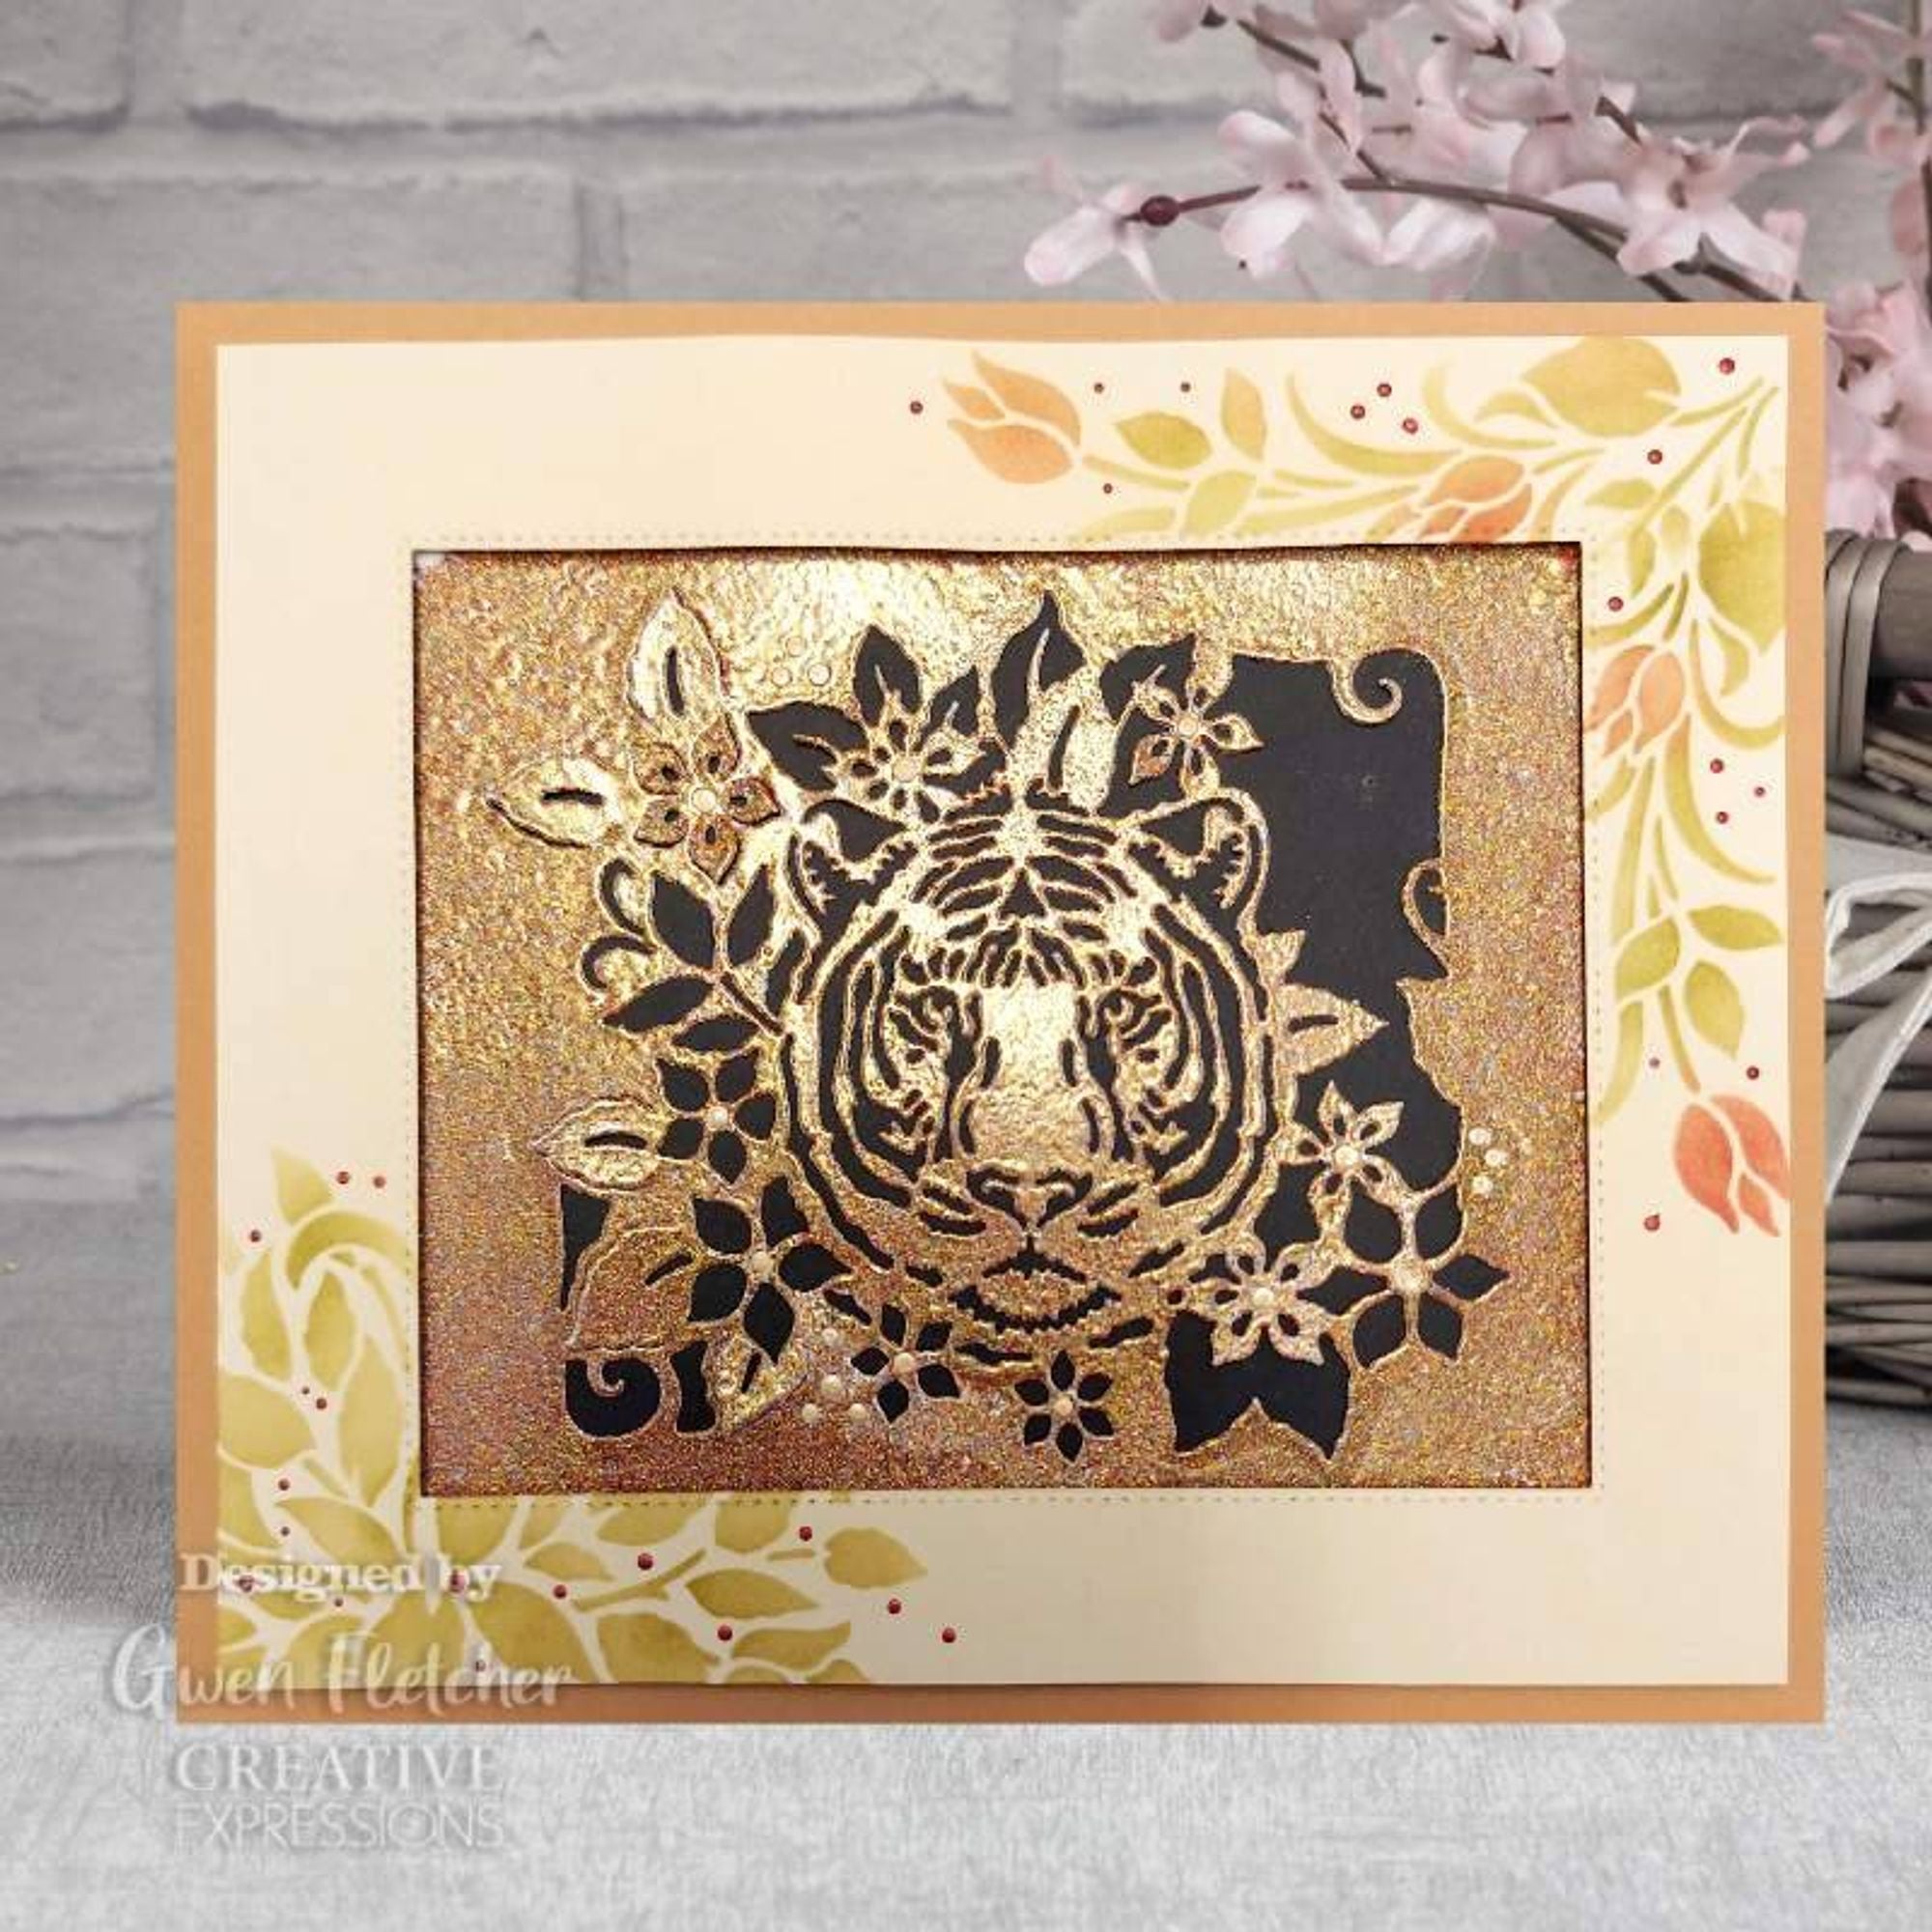 Creative Expressions Timeless Florals 7 in x 7 in Stencil